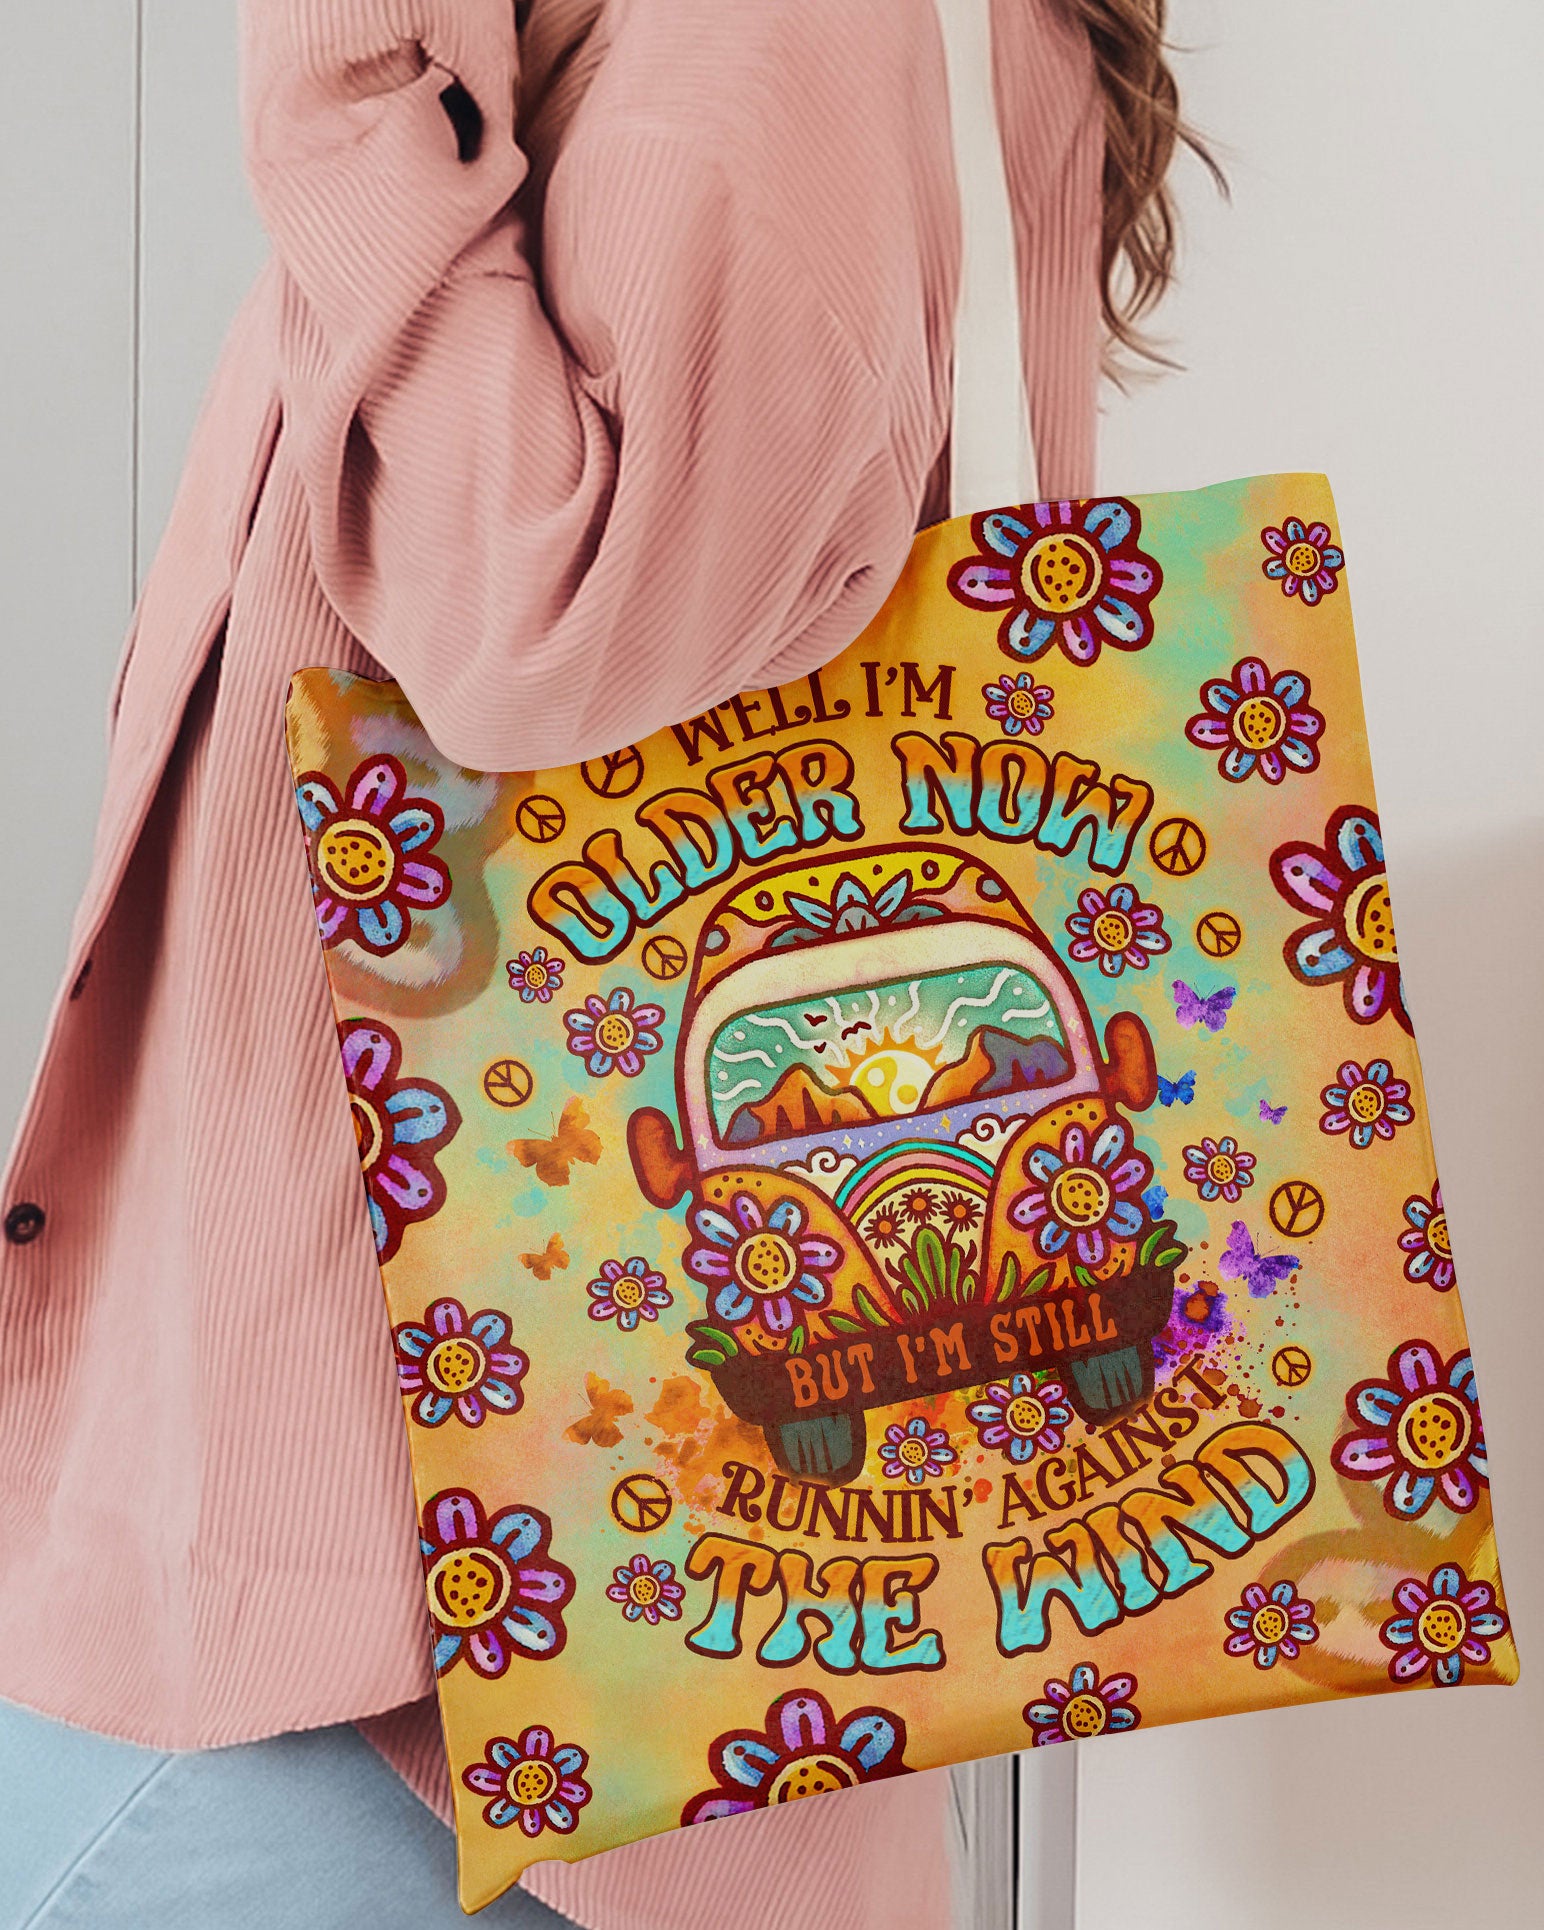 RUNNING AGAINST THE WIND TOTE BAG - TLNO1704242